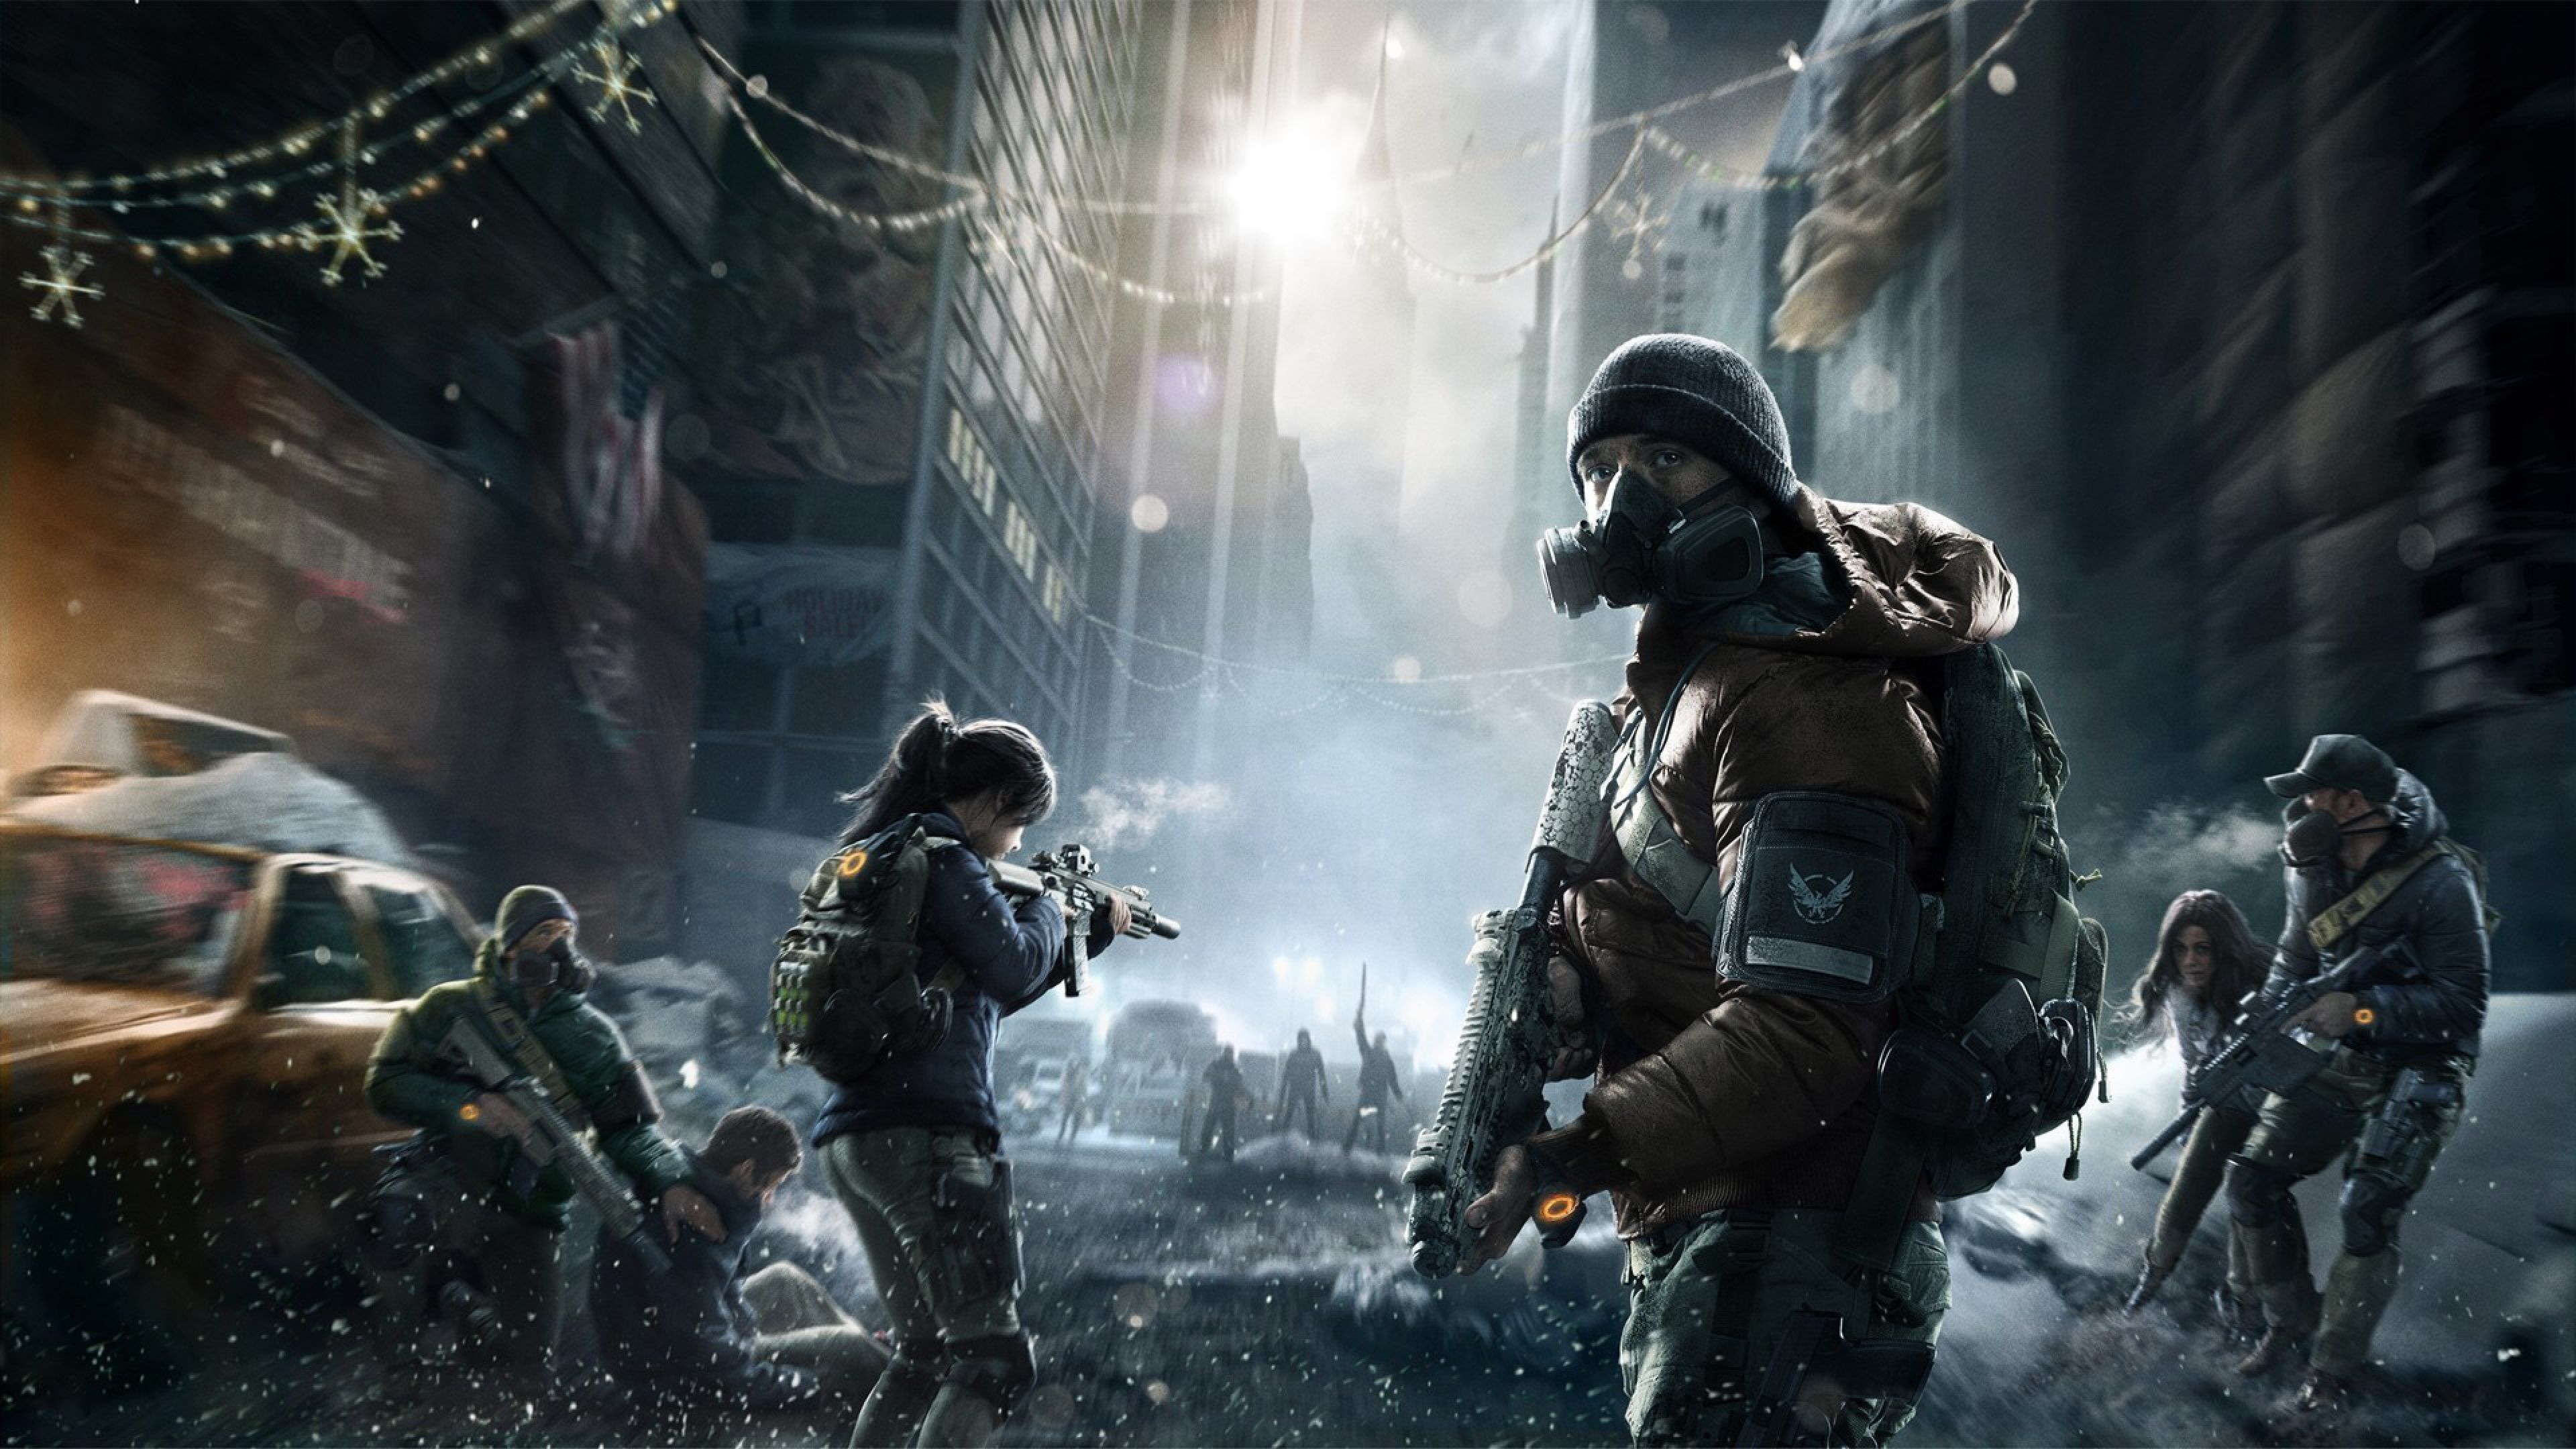 315, Ultra Hd Gaming Wallpapers, Ultra Gaming Widescreen - Tom Clancy's The  Division Wallpaper Hd - 3840x2160 Wallpaper 